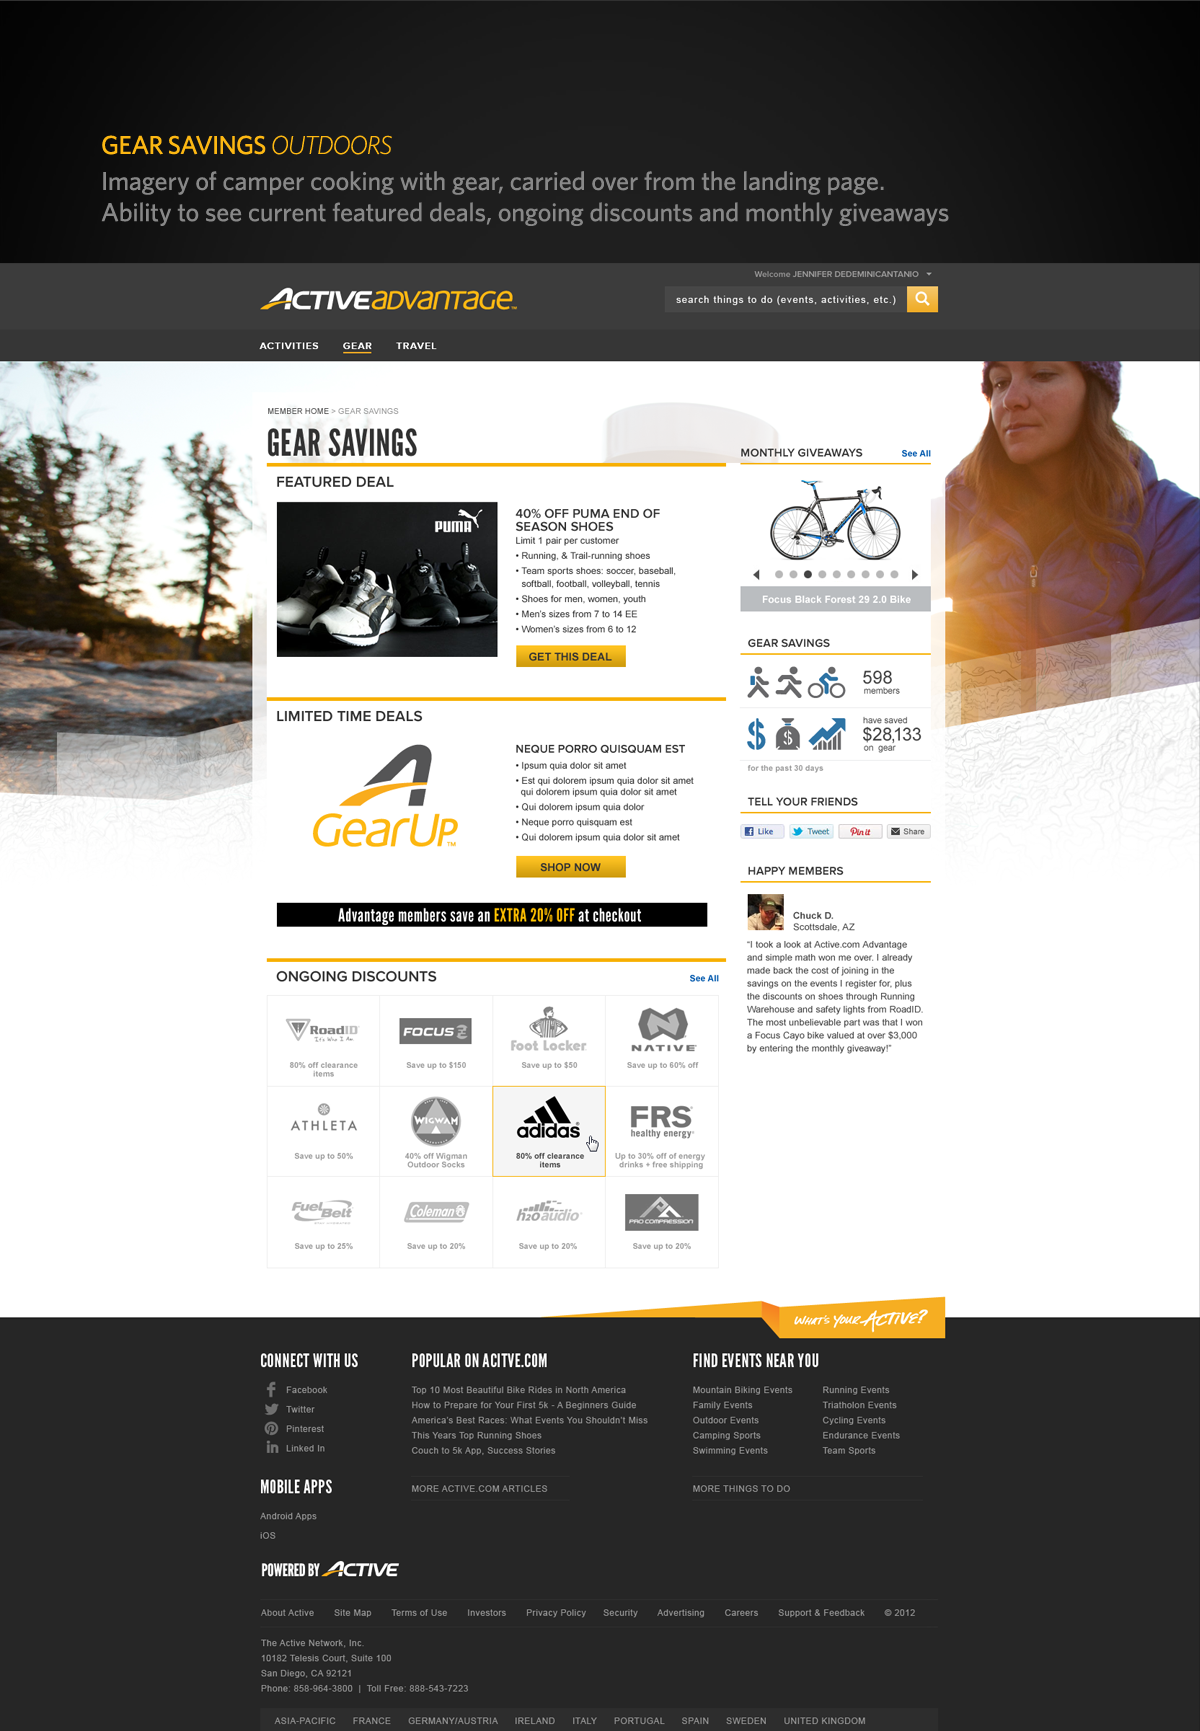 Endurance site Outdoors site Webdesign Active camping fishing hiking canoeing branding 